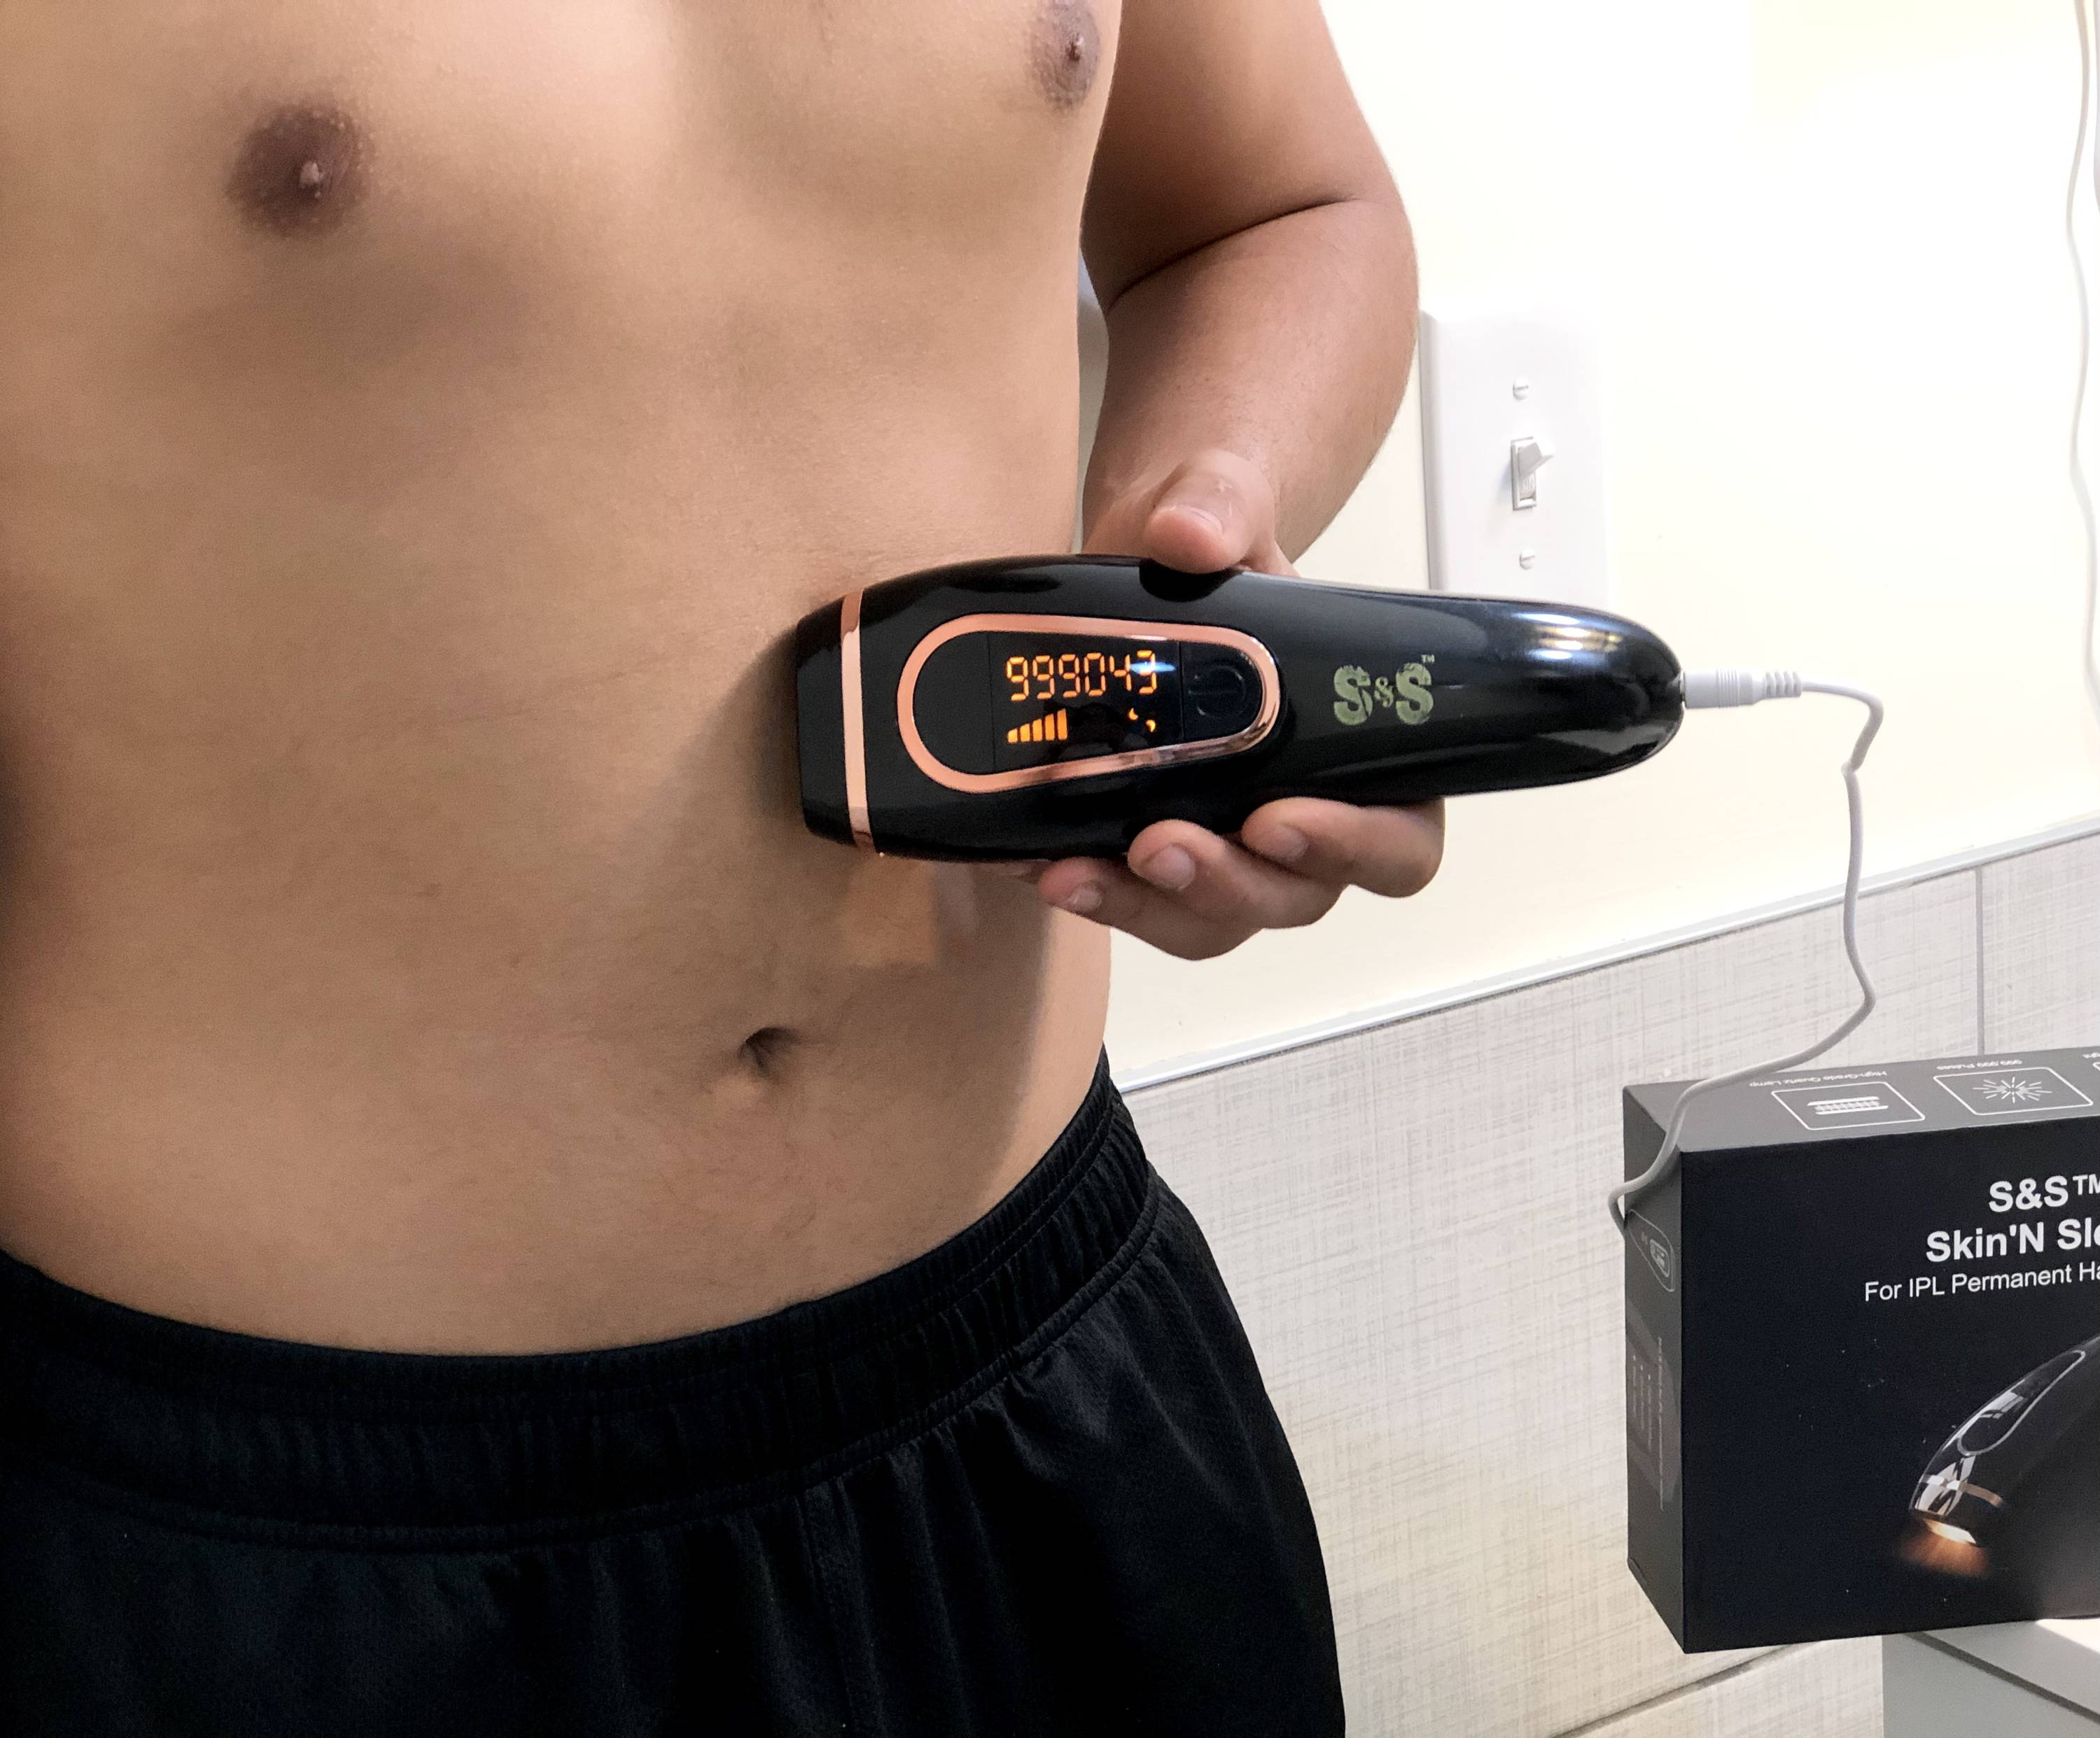  Permanent face hair removal,  laser hair removal machine,  hair removal for men,  men's hair removal, best home laser hair removal, permanent hair removal